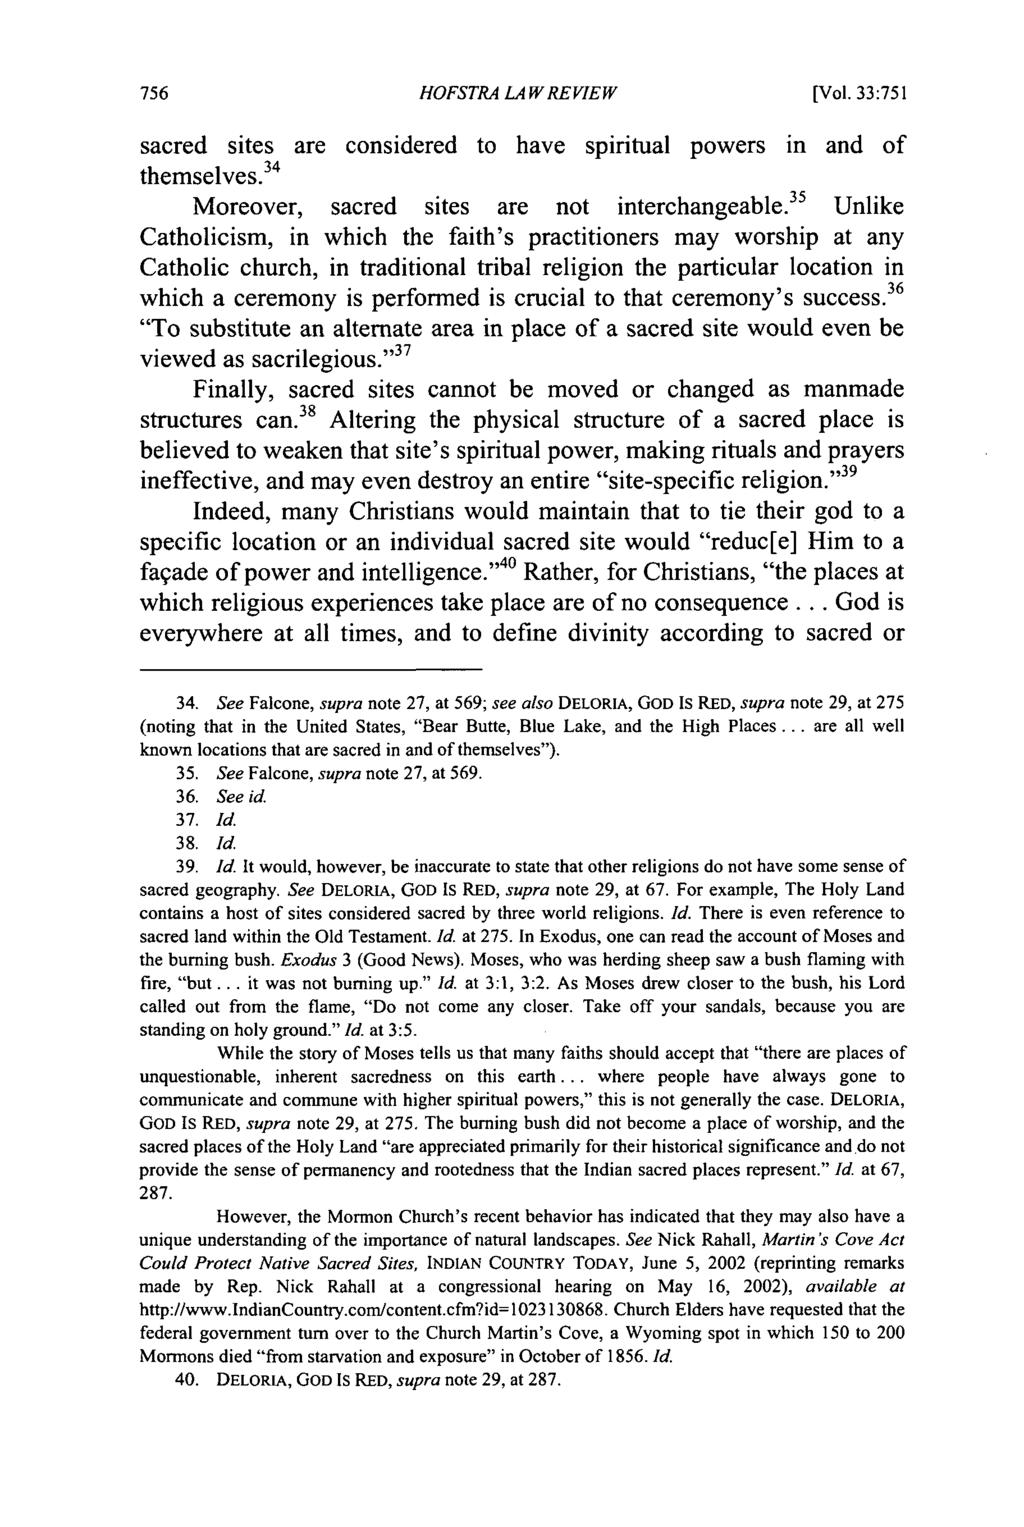 Hofstra Law Review, Vol. 33, Iss. 2 [2004], Art. 9 HOFSTRA LA W REVIEW [Vol. 33:751 sacred sites are considered to have spiritual powers in and of themselves.